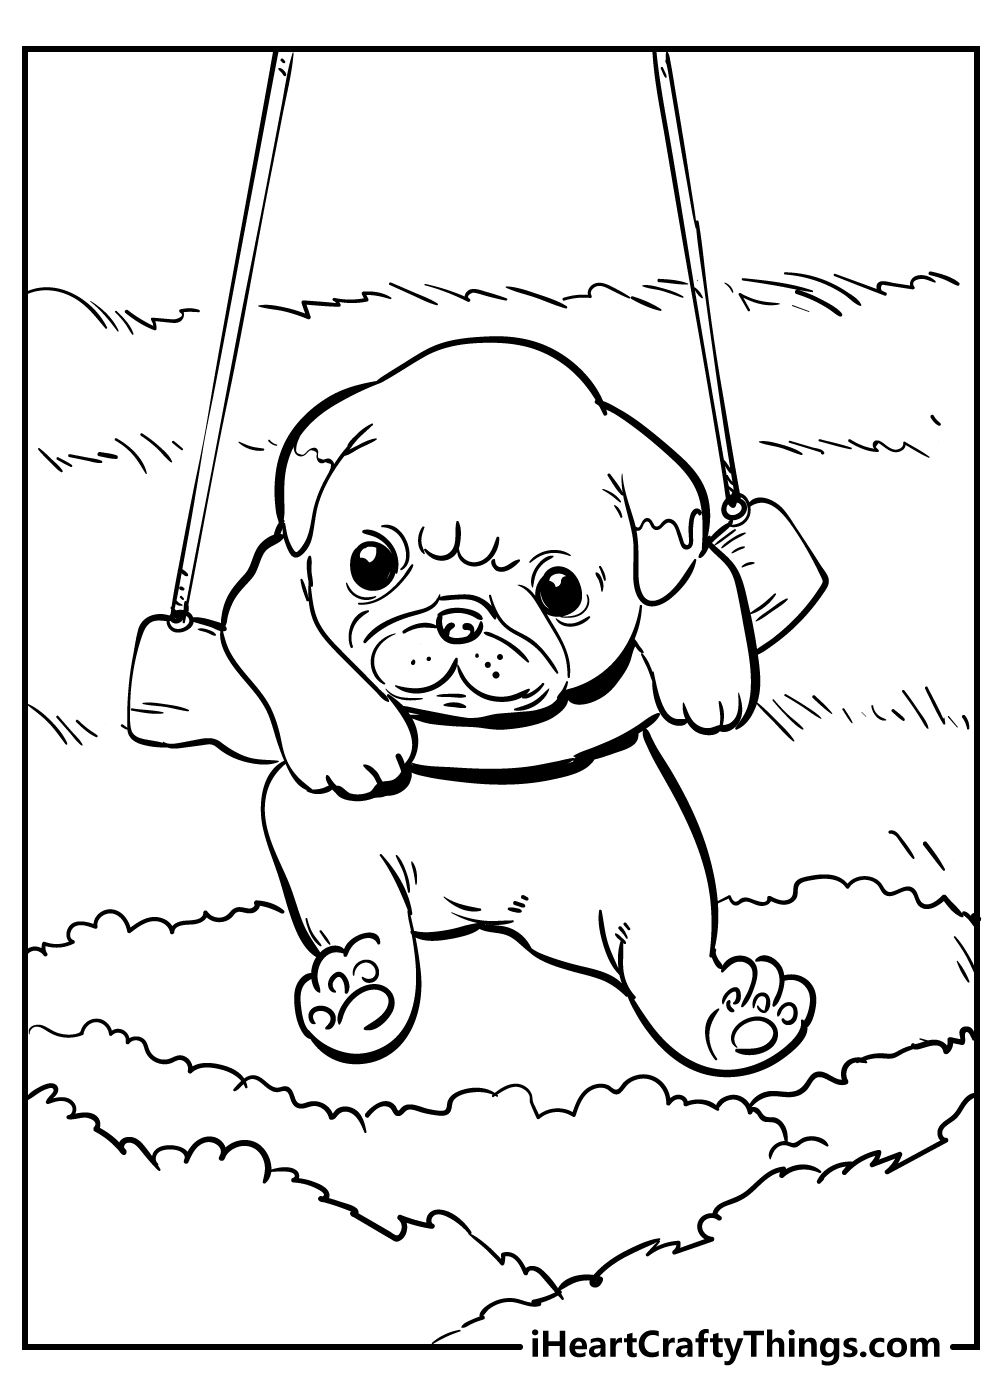 Cute Animals Coloring Pages | Animal coloring pages, Puppy coloring pages,  Cool coloring pages